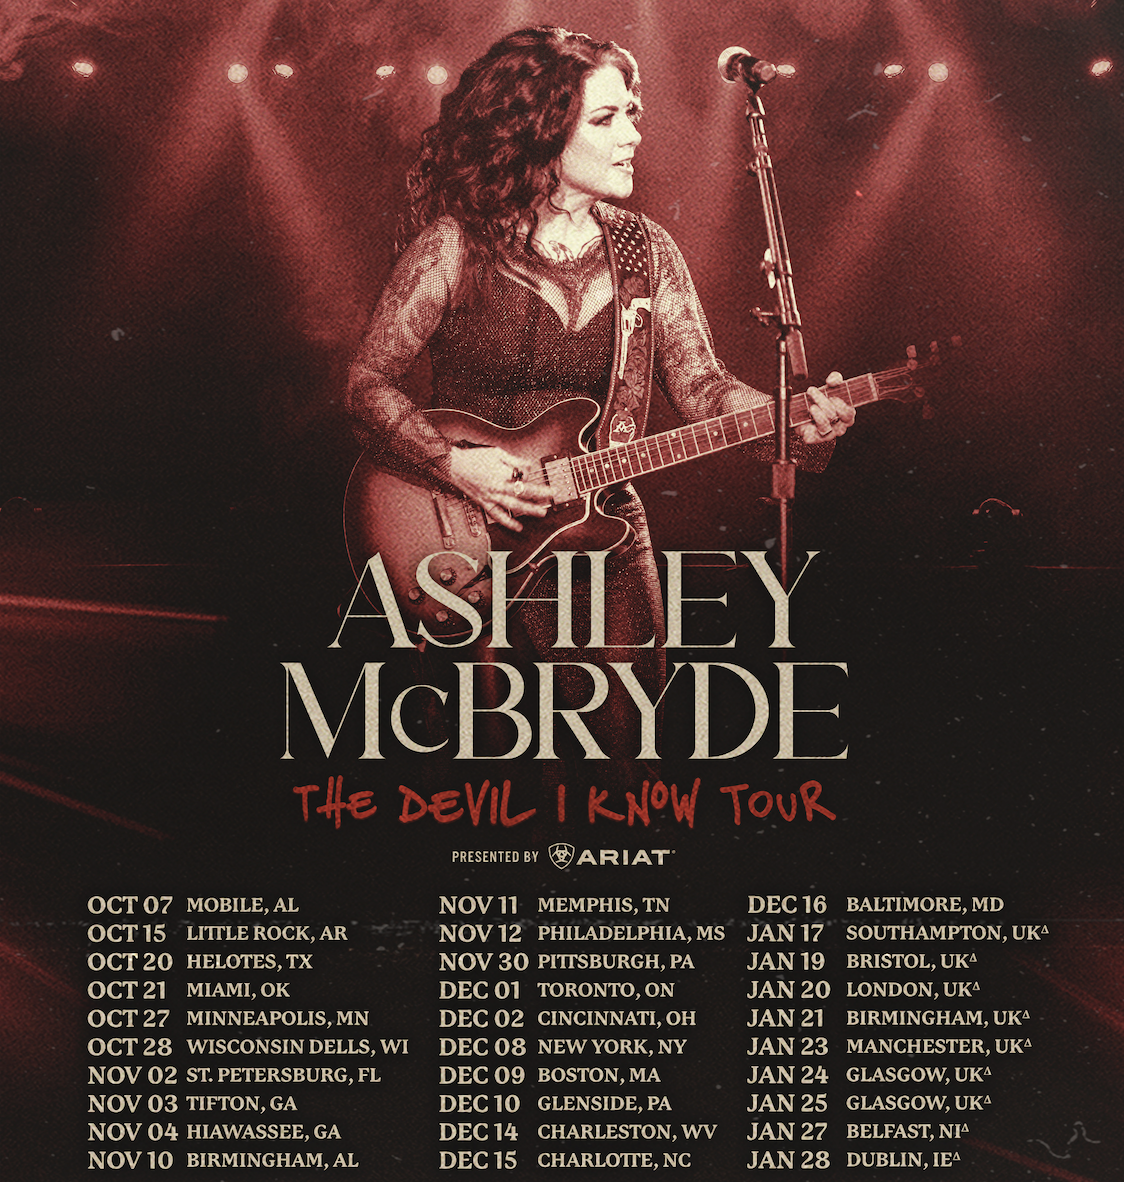 ASHLEY McBRYDE ANNOUNCES THE DEVIL I KNOW TOUR PRESENTED BY ARIAT